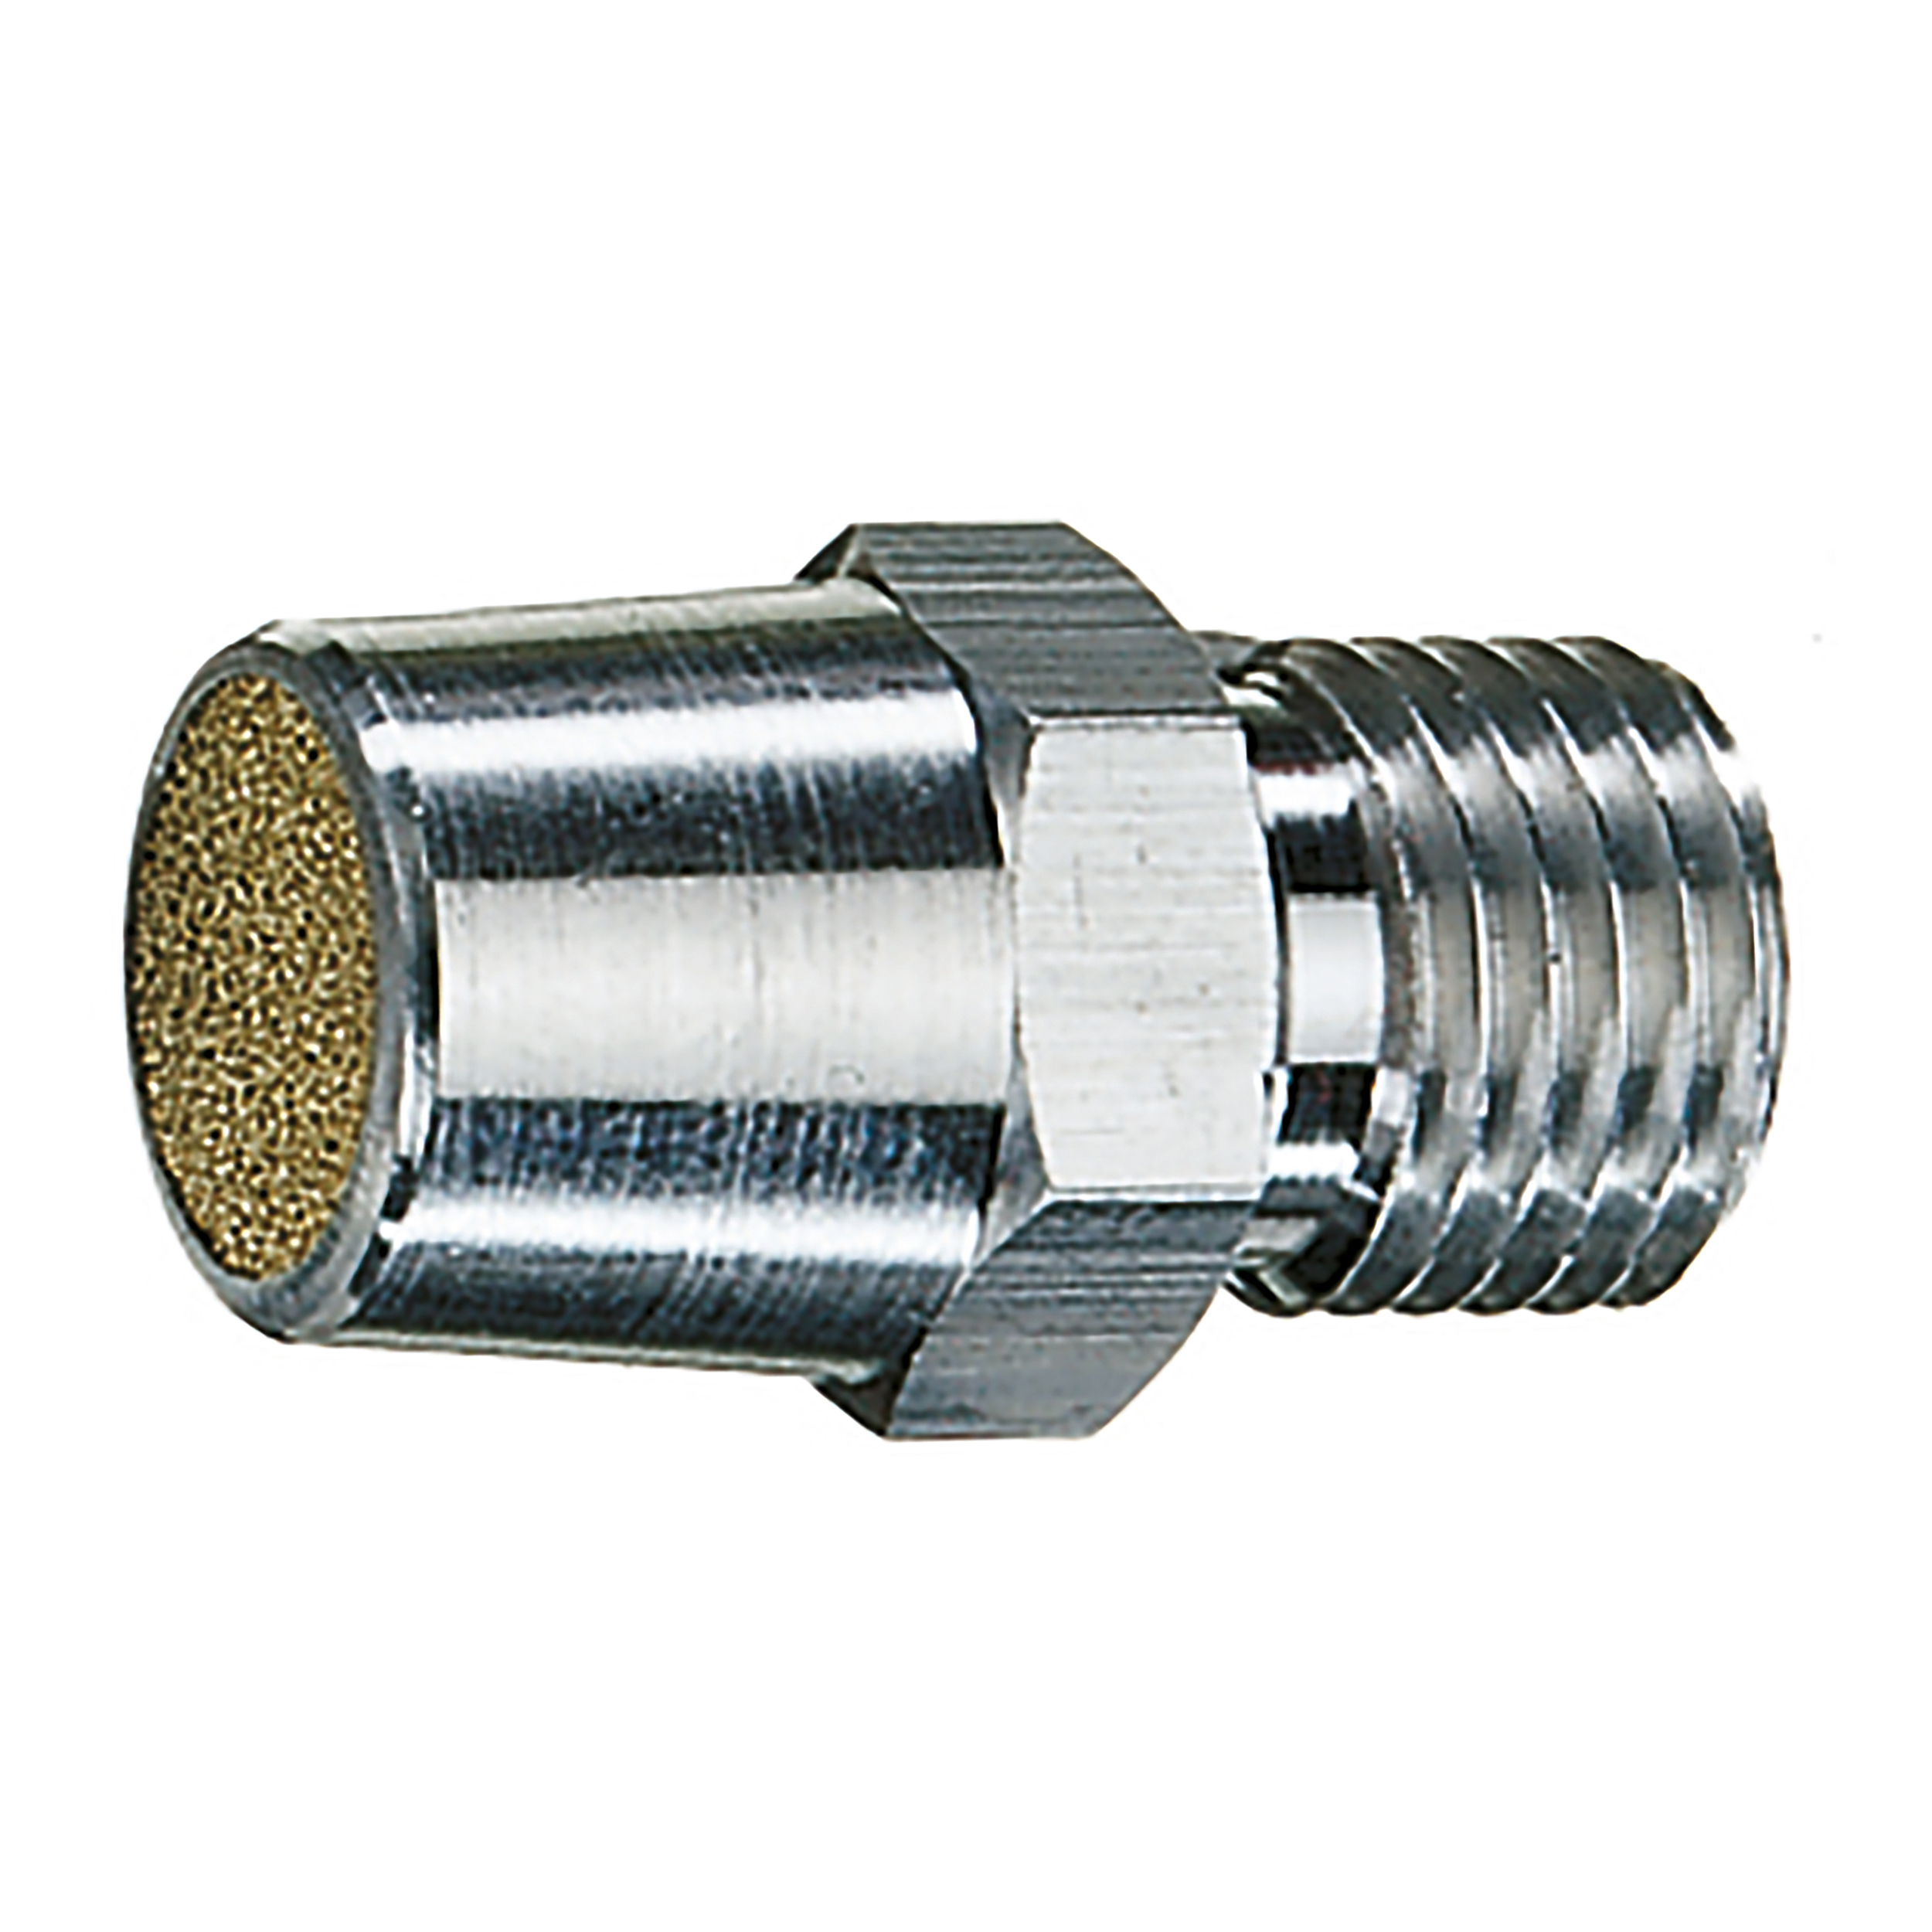 Noise reducing nozzle, insert made of sintered metal, alu/sintered metal, connection thread: M12 × 1.25, sound level < 70 dB(A)